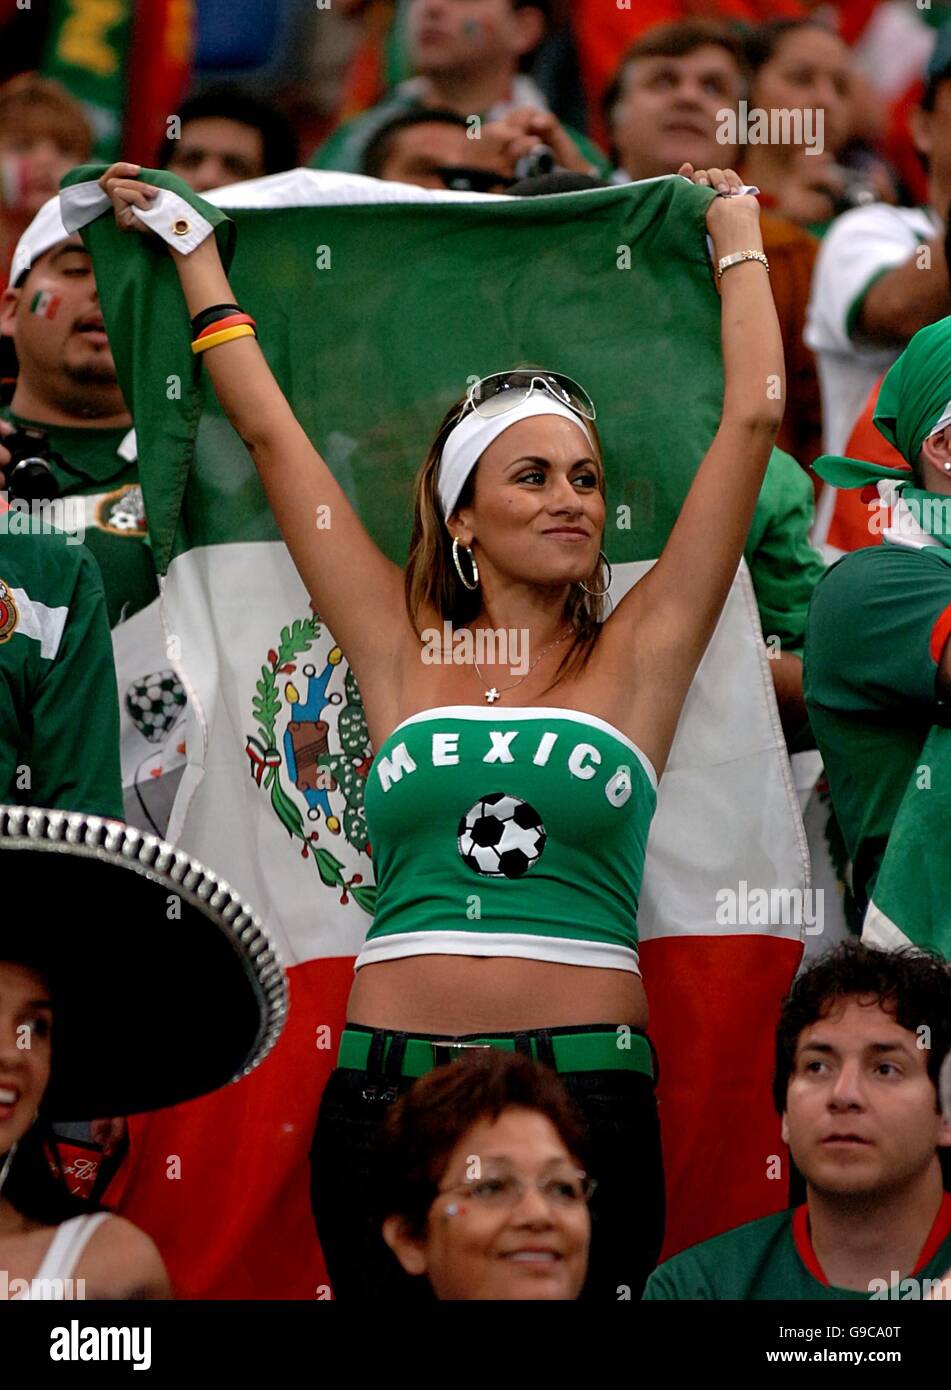 Soccer - 2006 FIFA World Cup Germany - Group D - Portugal v Mexico - AufSchalke Arena. A Mexico fan prior to the game Stock Photo